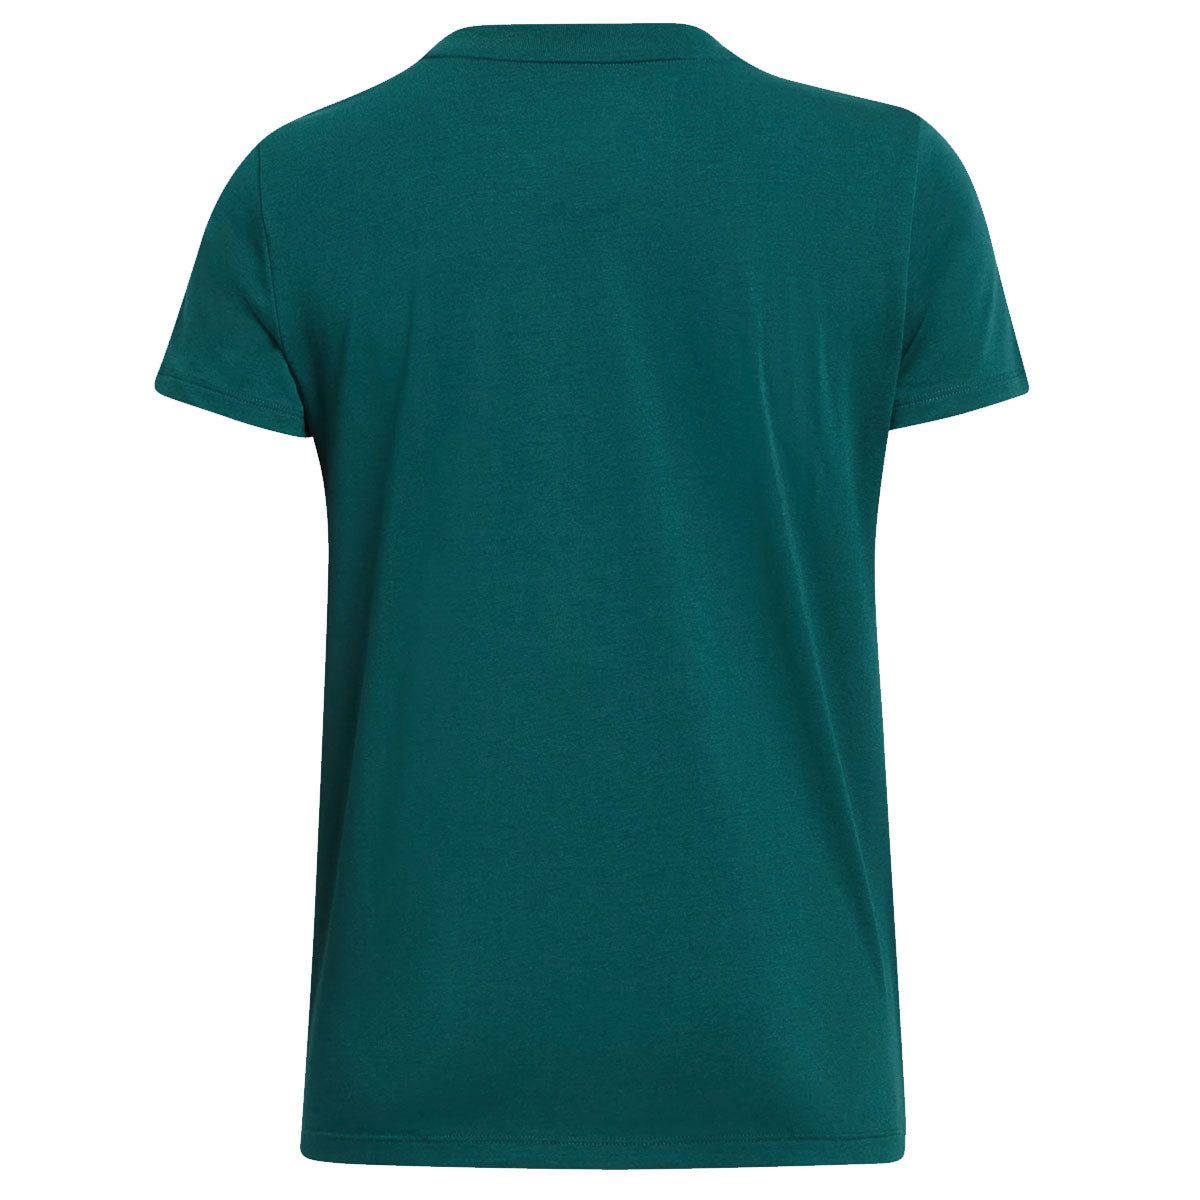 Under Armour Off Campus Core Short Sleeve Tee - Womens - Hydro Teal/White